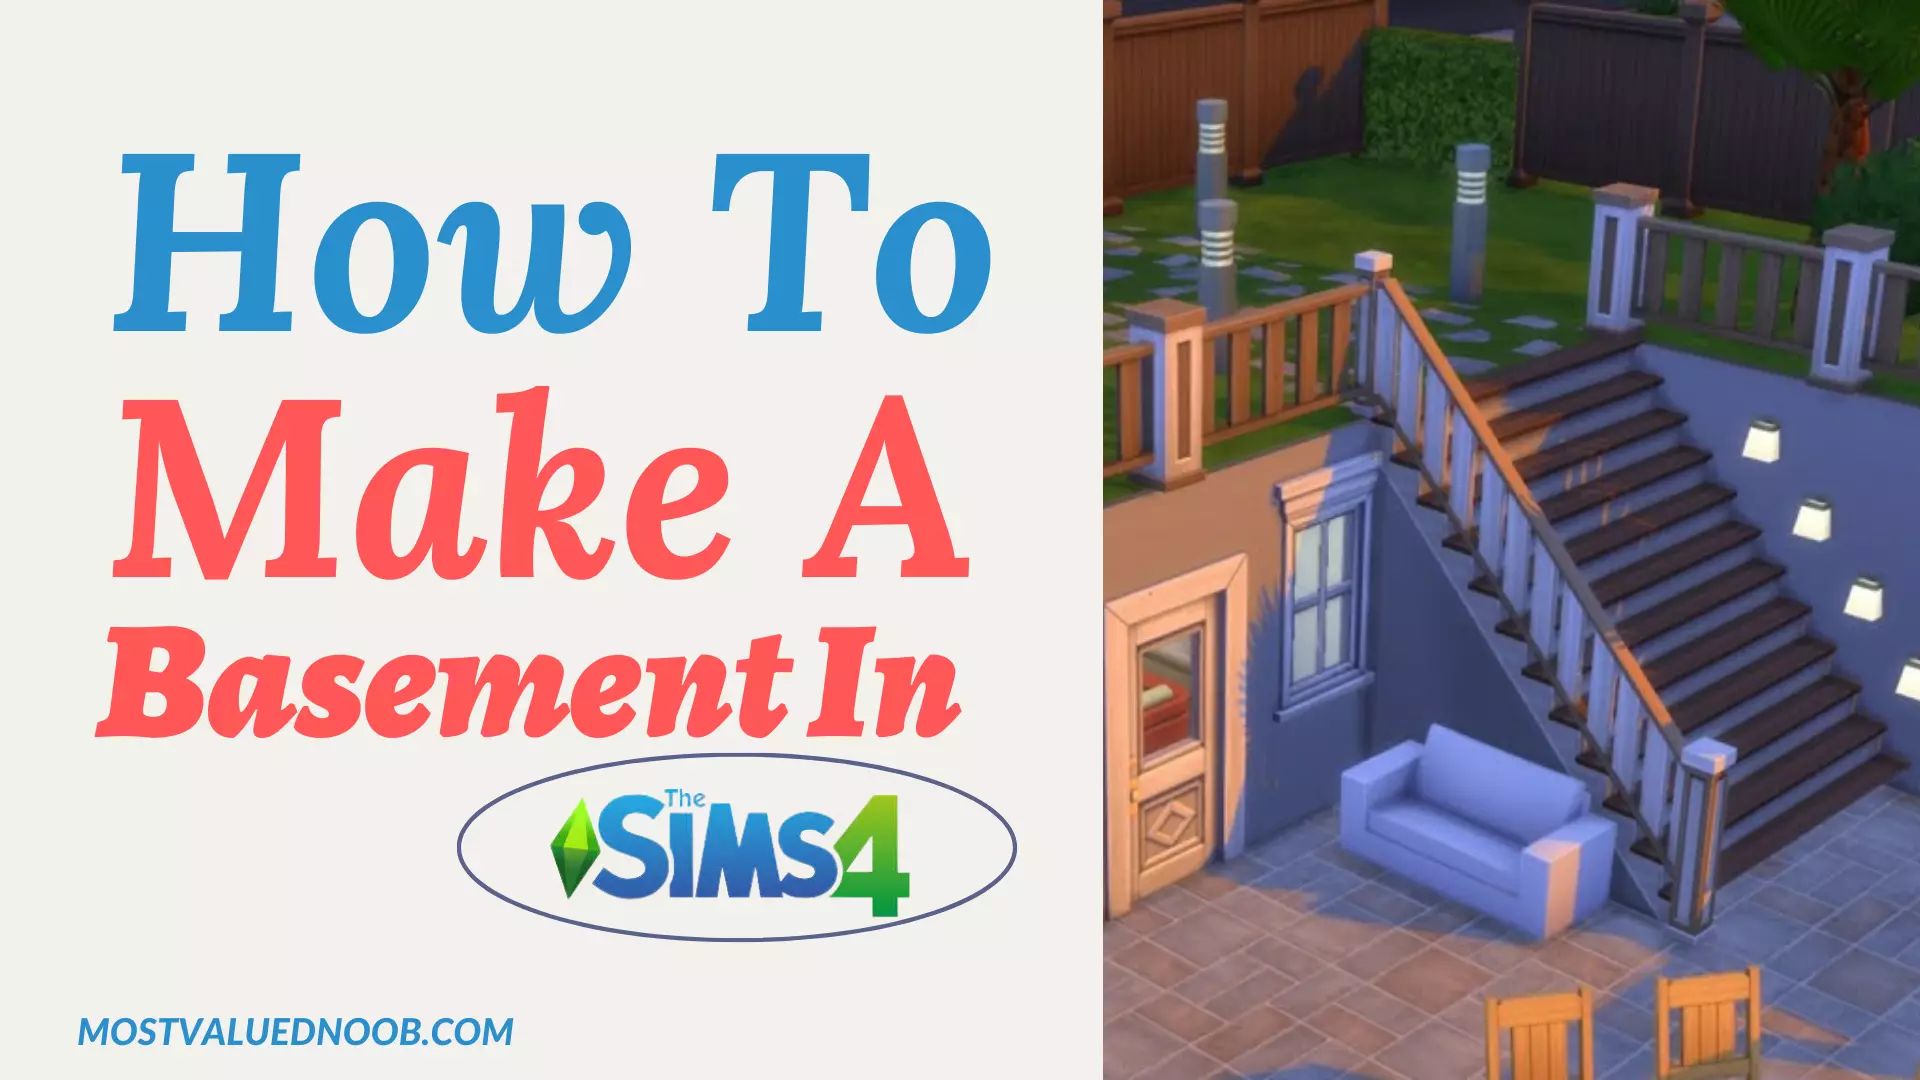 How To Make A Basement In Sims 4